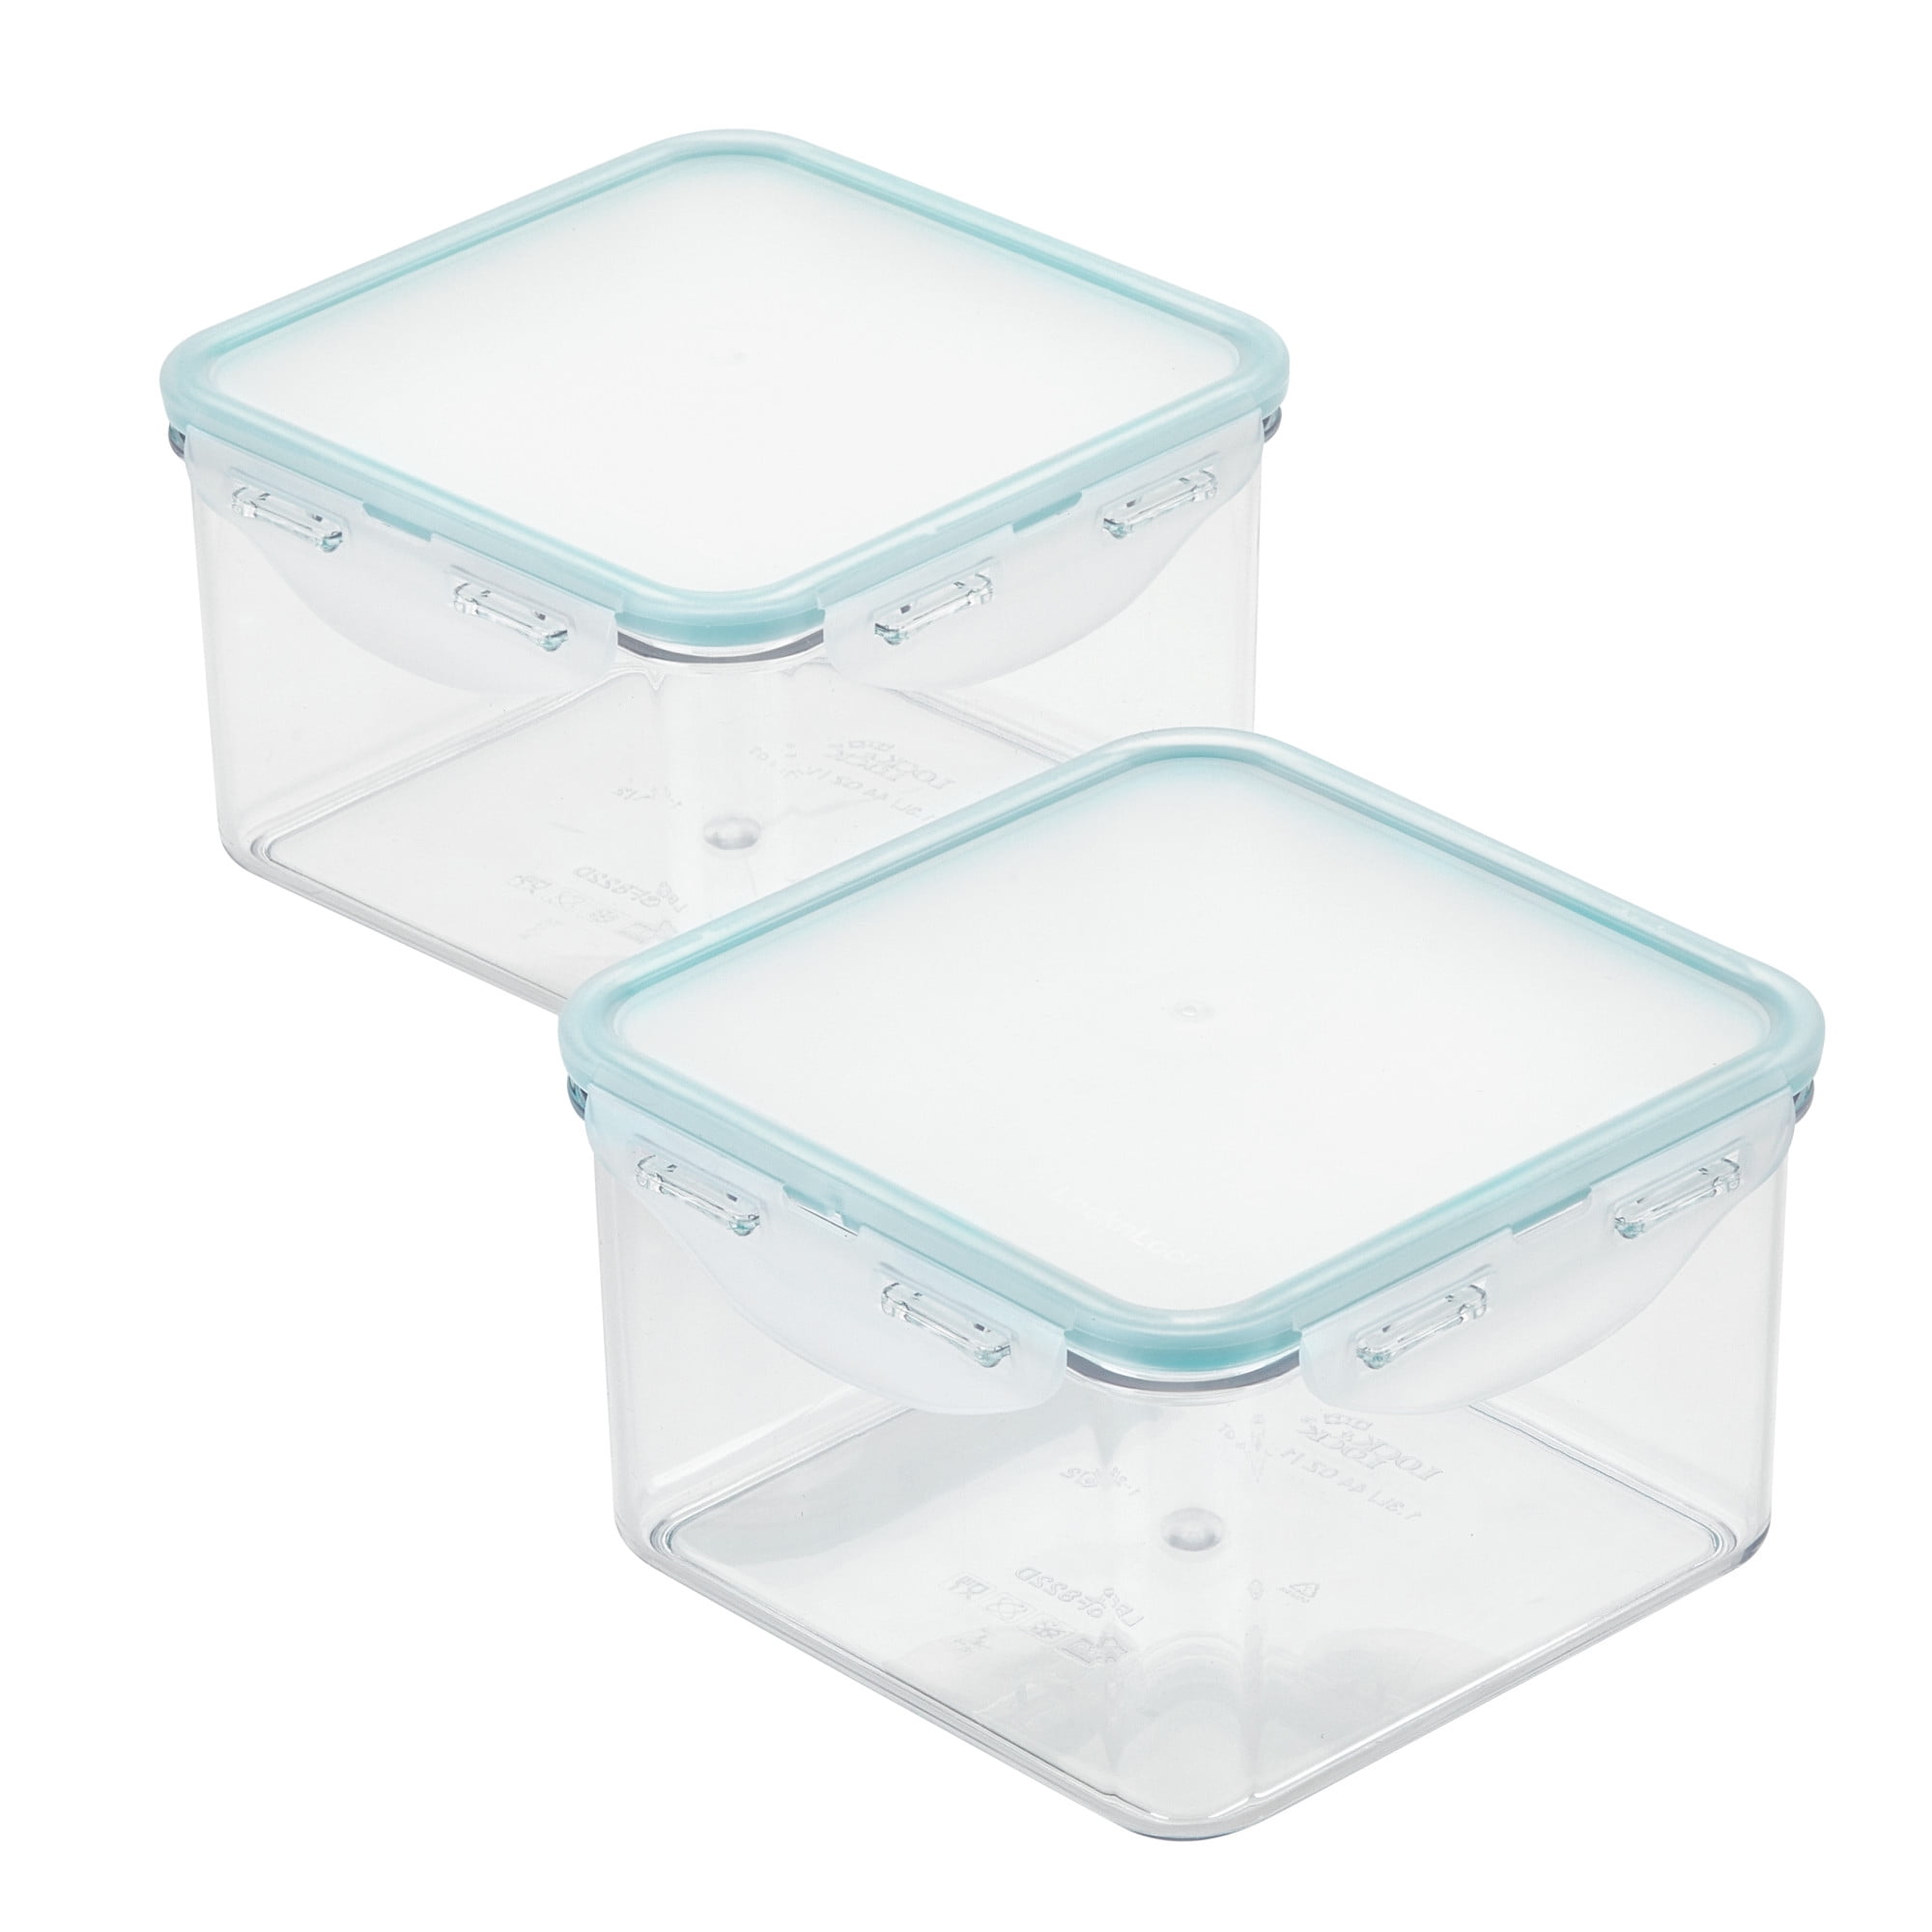 Lock n Lock Purely Better™ Vented Glass 47-Oz. Food Storage Container -  Macy's